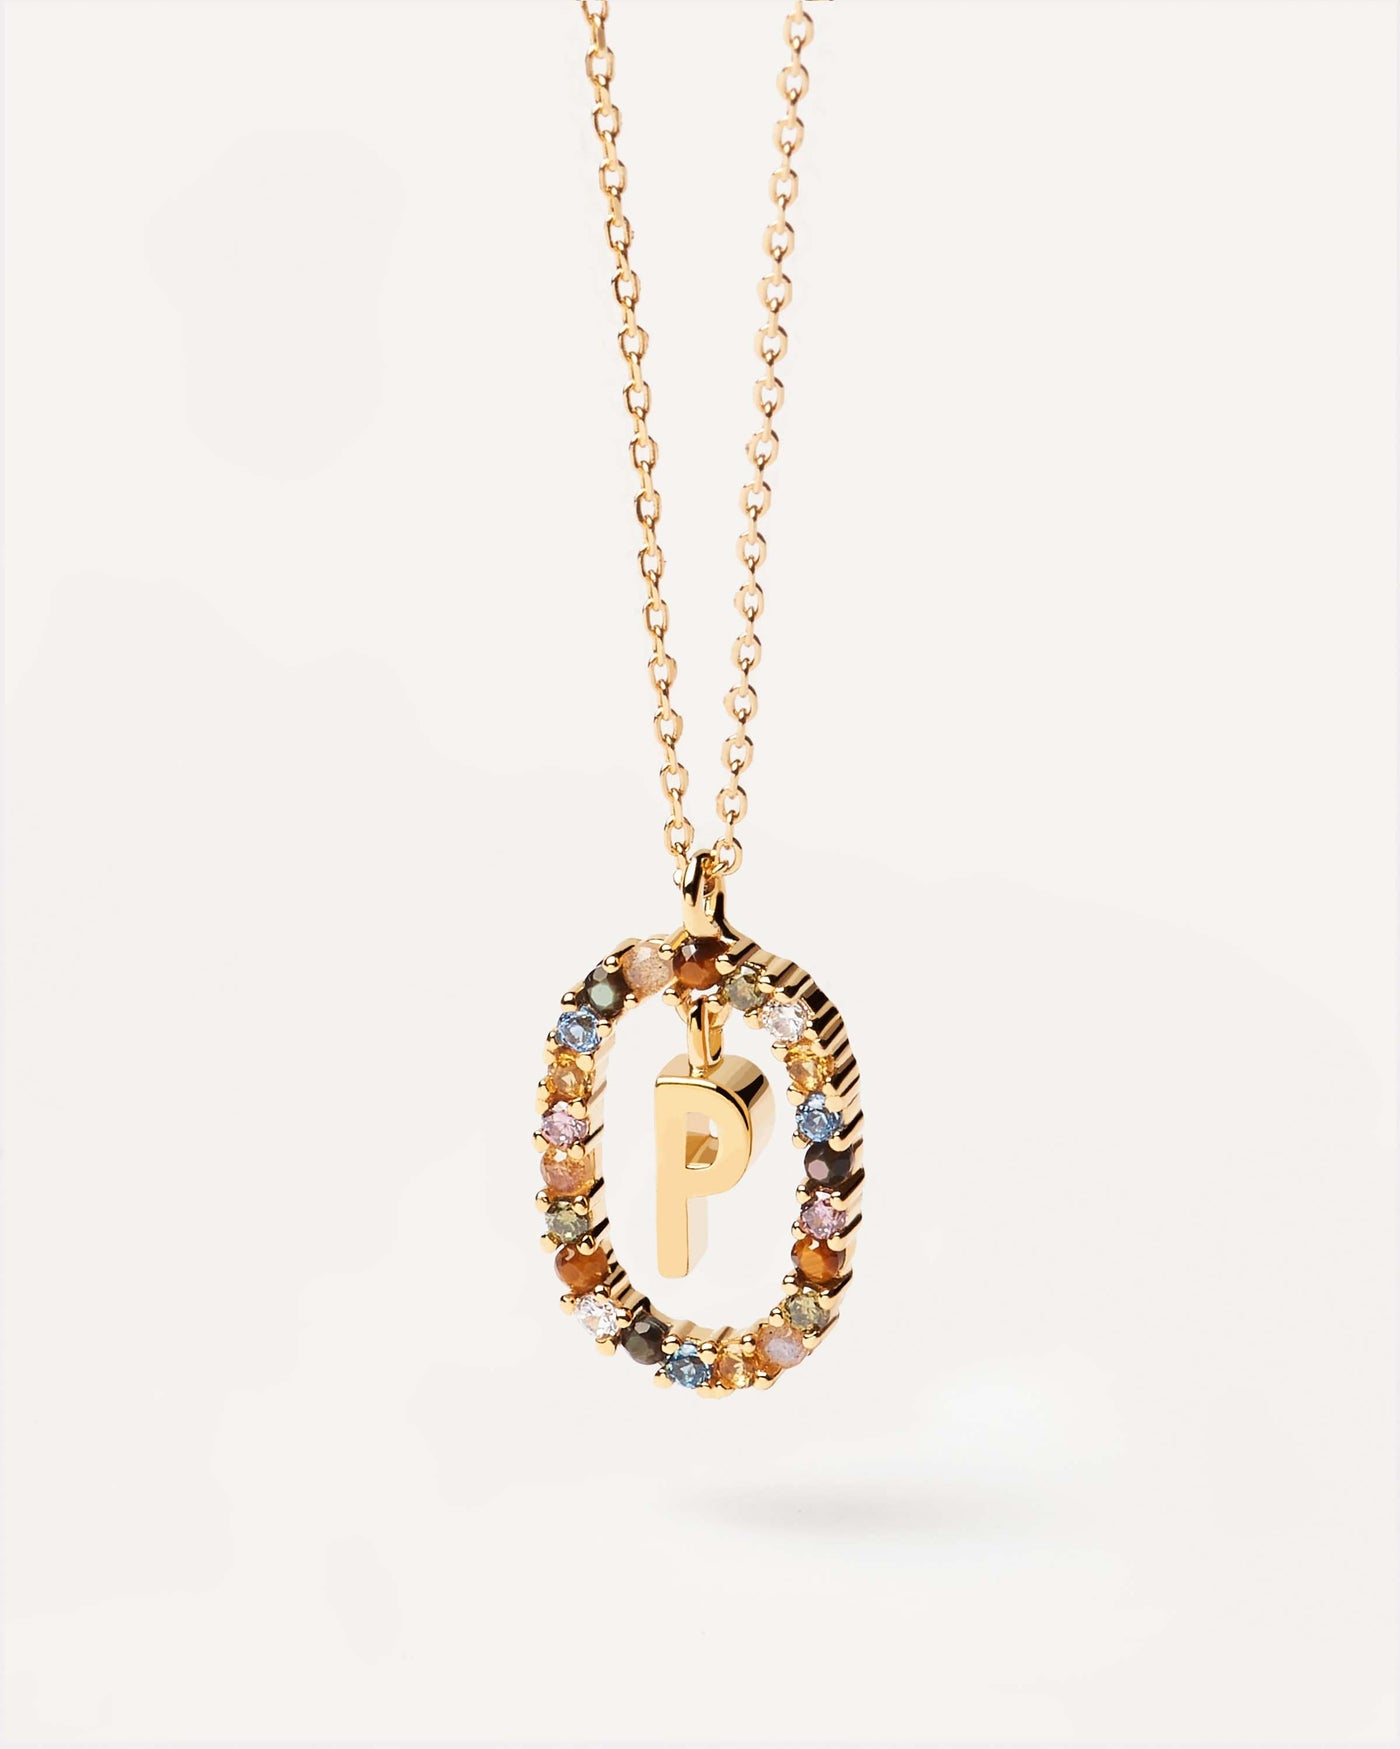 2023 Selection | Letter P necklace. Initial P necklace in gold-plated silver, circled by colorful gemstones. Get the latest arrival from PDPAOLA. Place your order safely and get this Best Seller. Free Shipping.